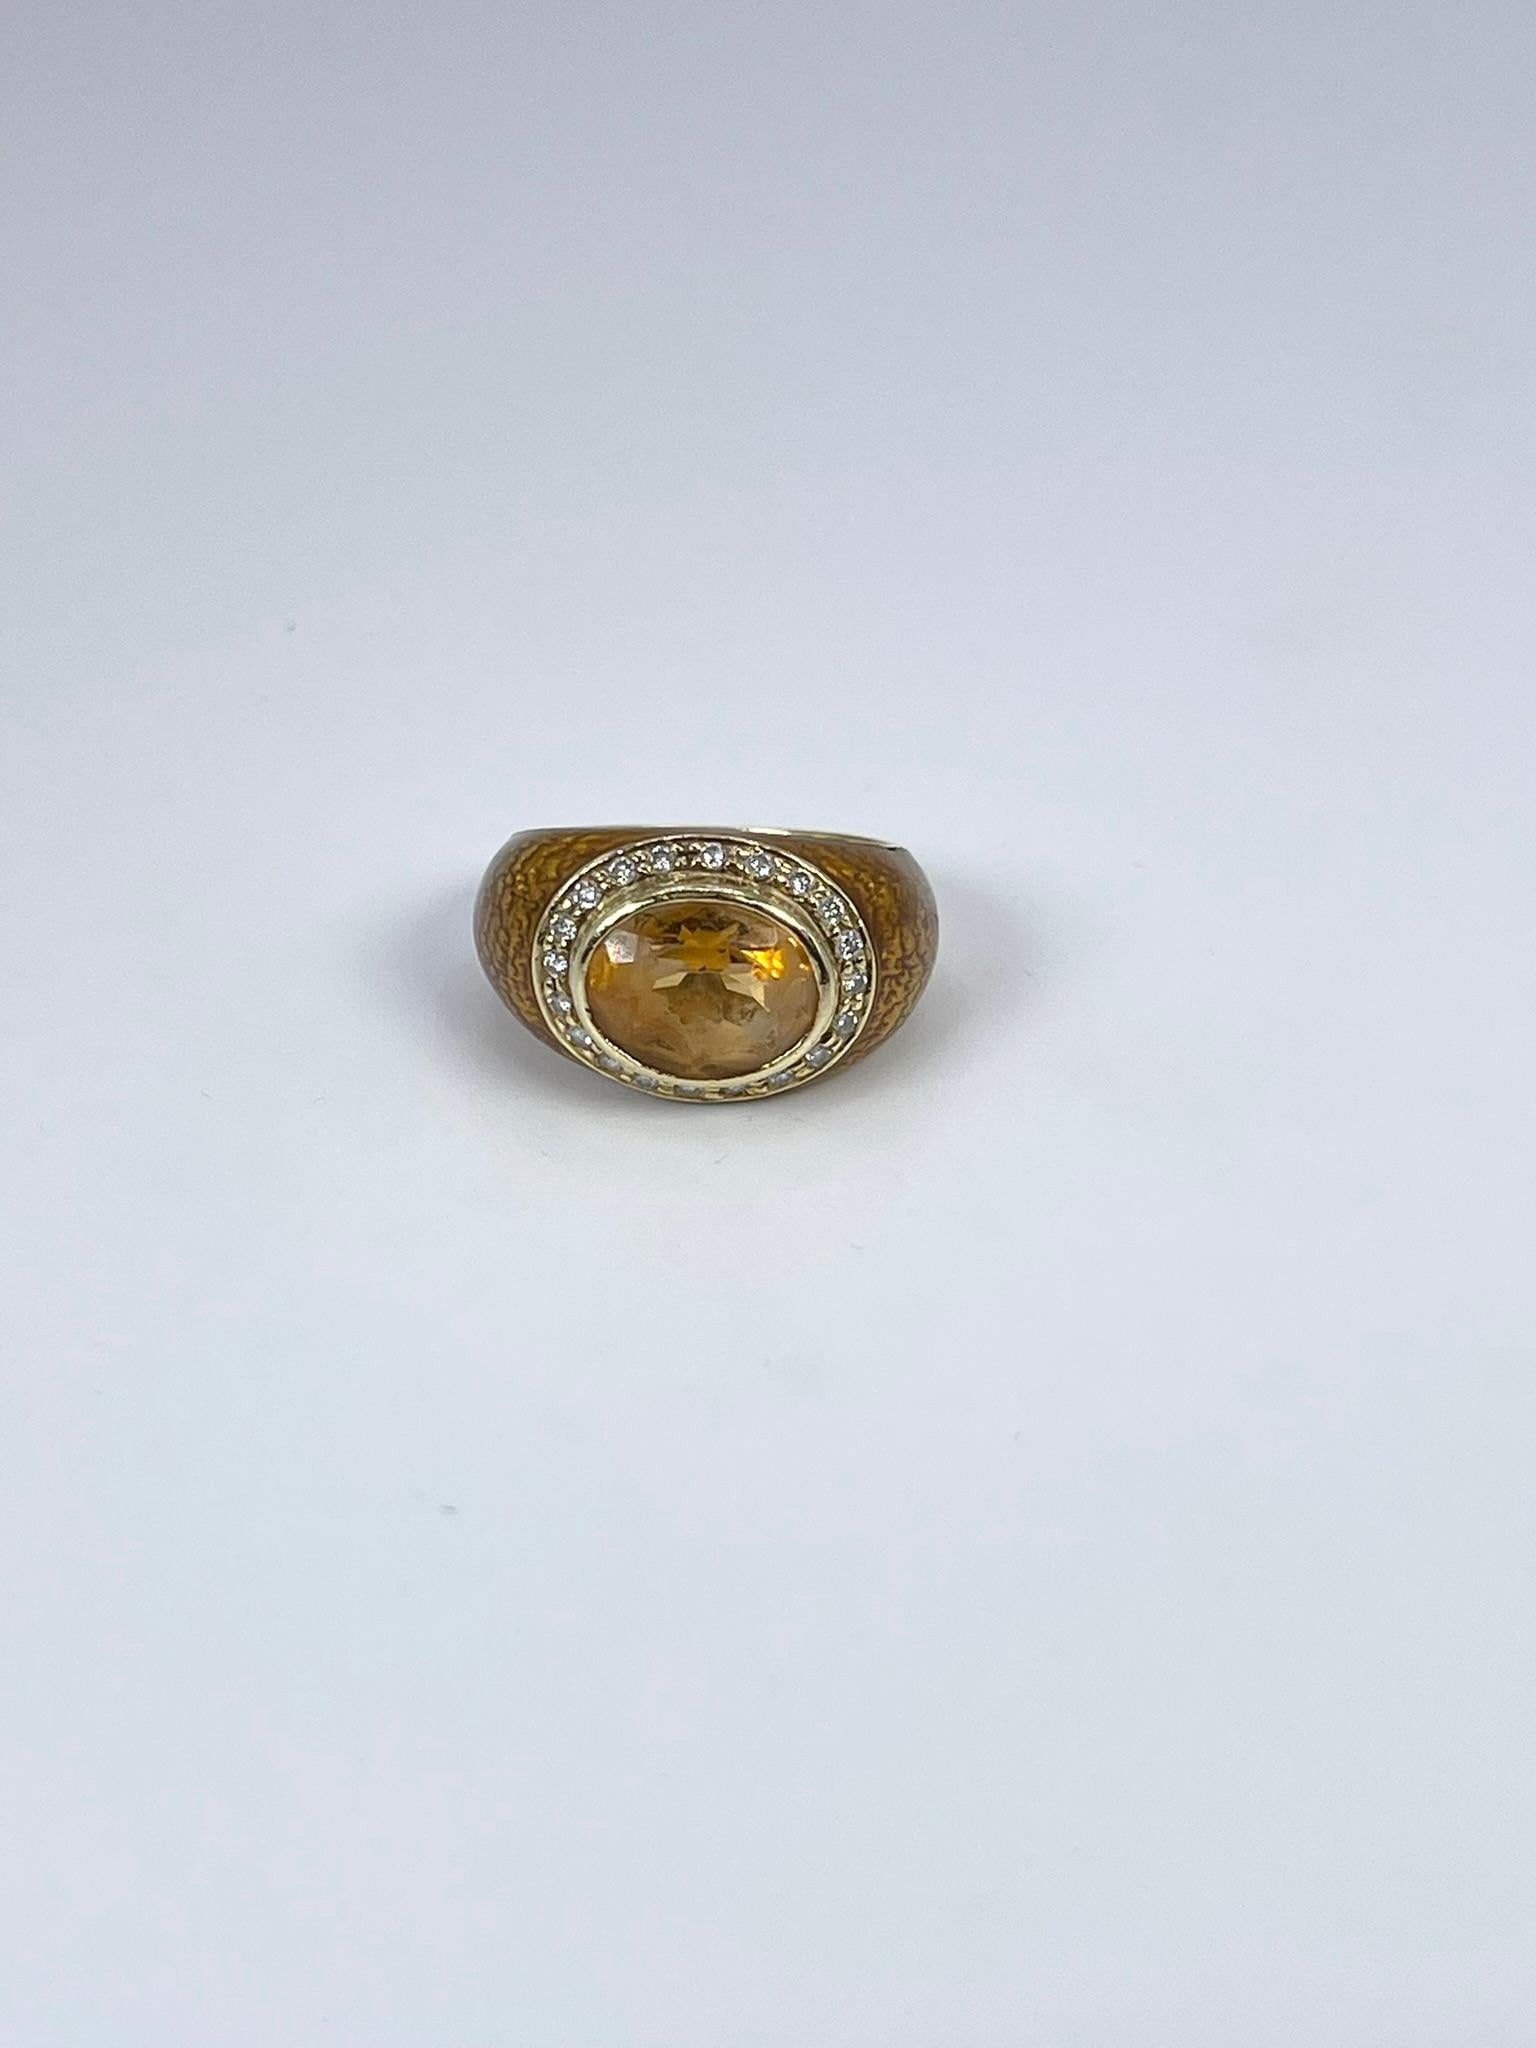 Stunning citrine ring made in 18KT yellow gold, open back, dome ring unisex.

GRAM WEIGHT: 7.91gr
GOLD: 18KT yellow gold
NATURAL CITRINE
Count: 1 
Cut: Oval 
Color: Orange
Clarity: Very Slightly Included
Carate: 4.12ct

NATURAL DIAMOND(S)
Count: